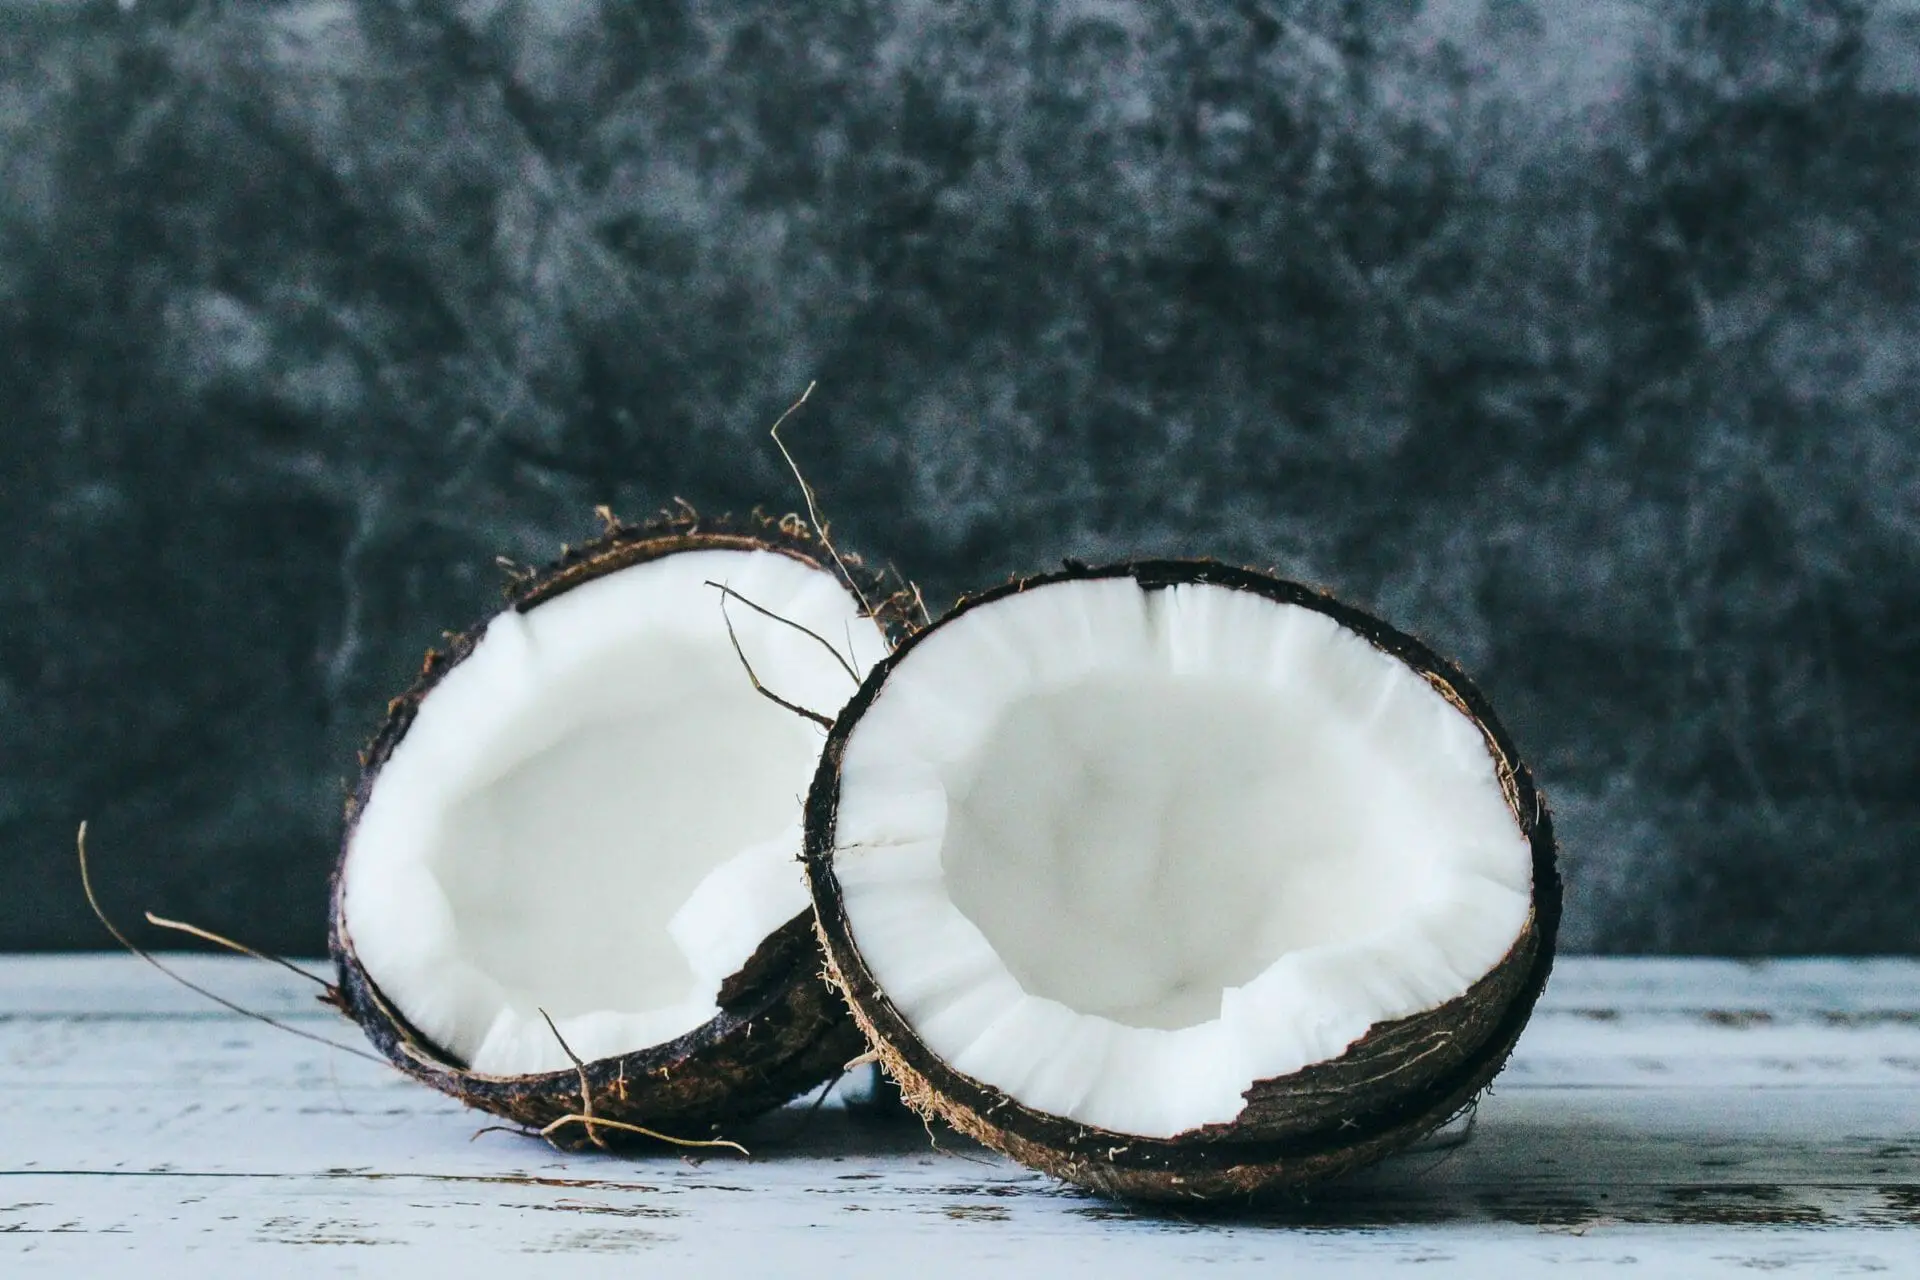 Coconuts contain coconut water which you can use for smoothies